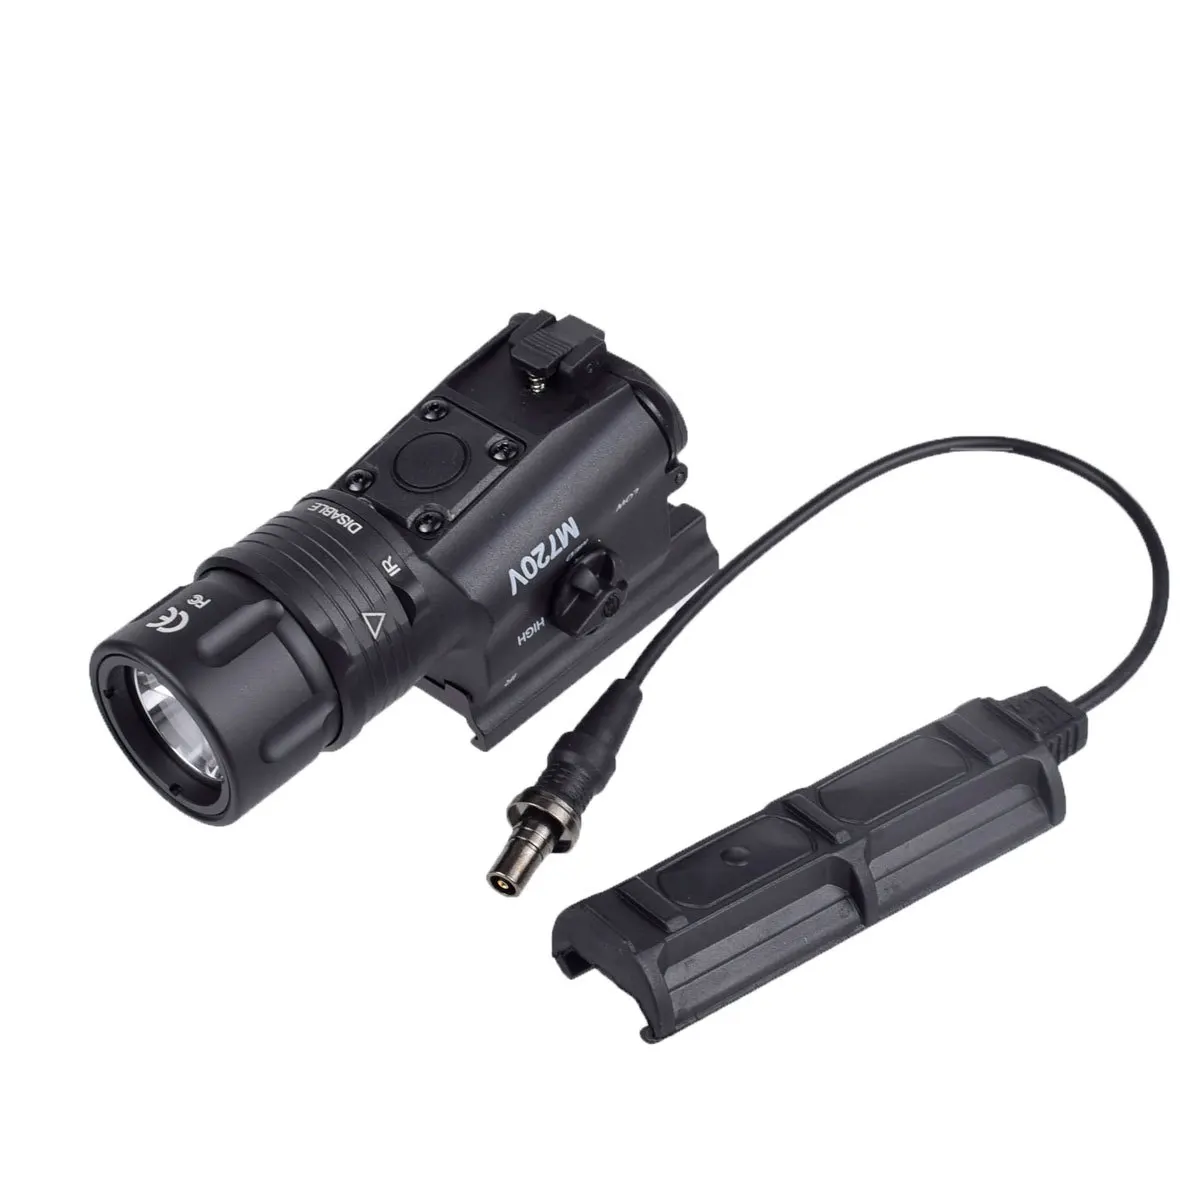 

M720V Outdoor Lighting Quick Release 20Mm Guide Rail Tactical Led Lighting Flash Flashlight